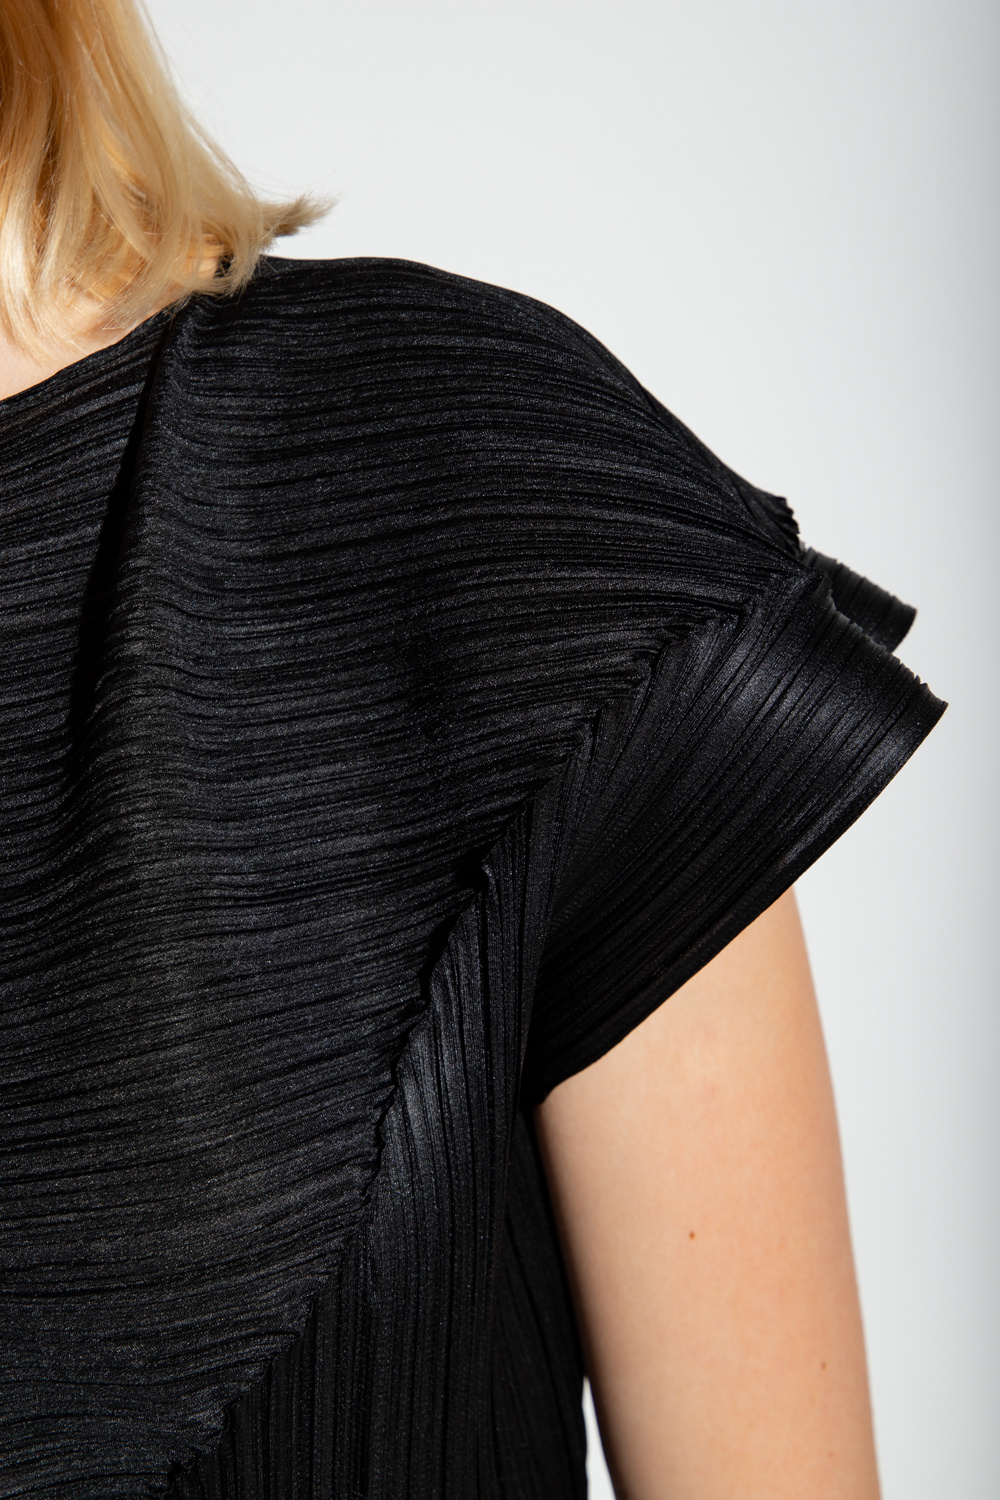 Black pleated top with straps and a decorative draped neckline from Issey Miyake Pleats Please Frequently asked questions